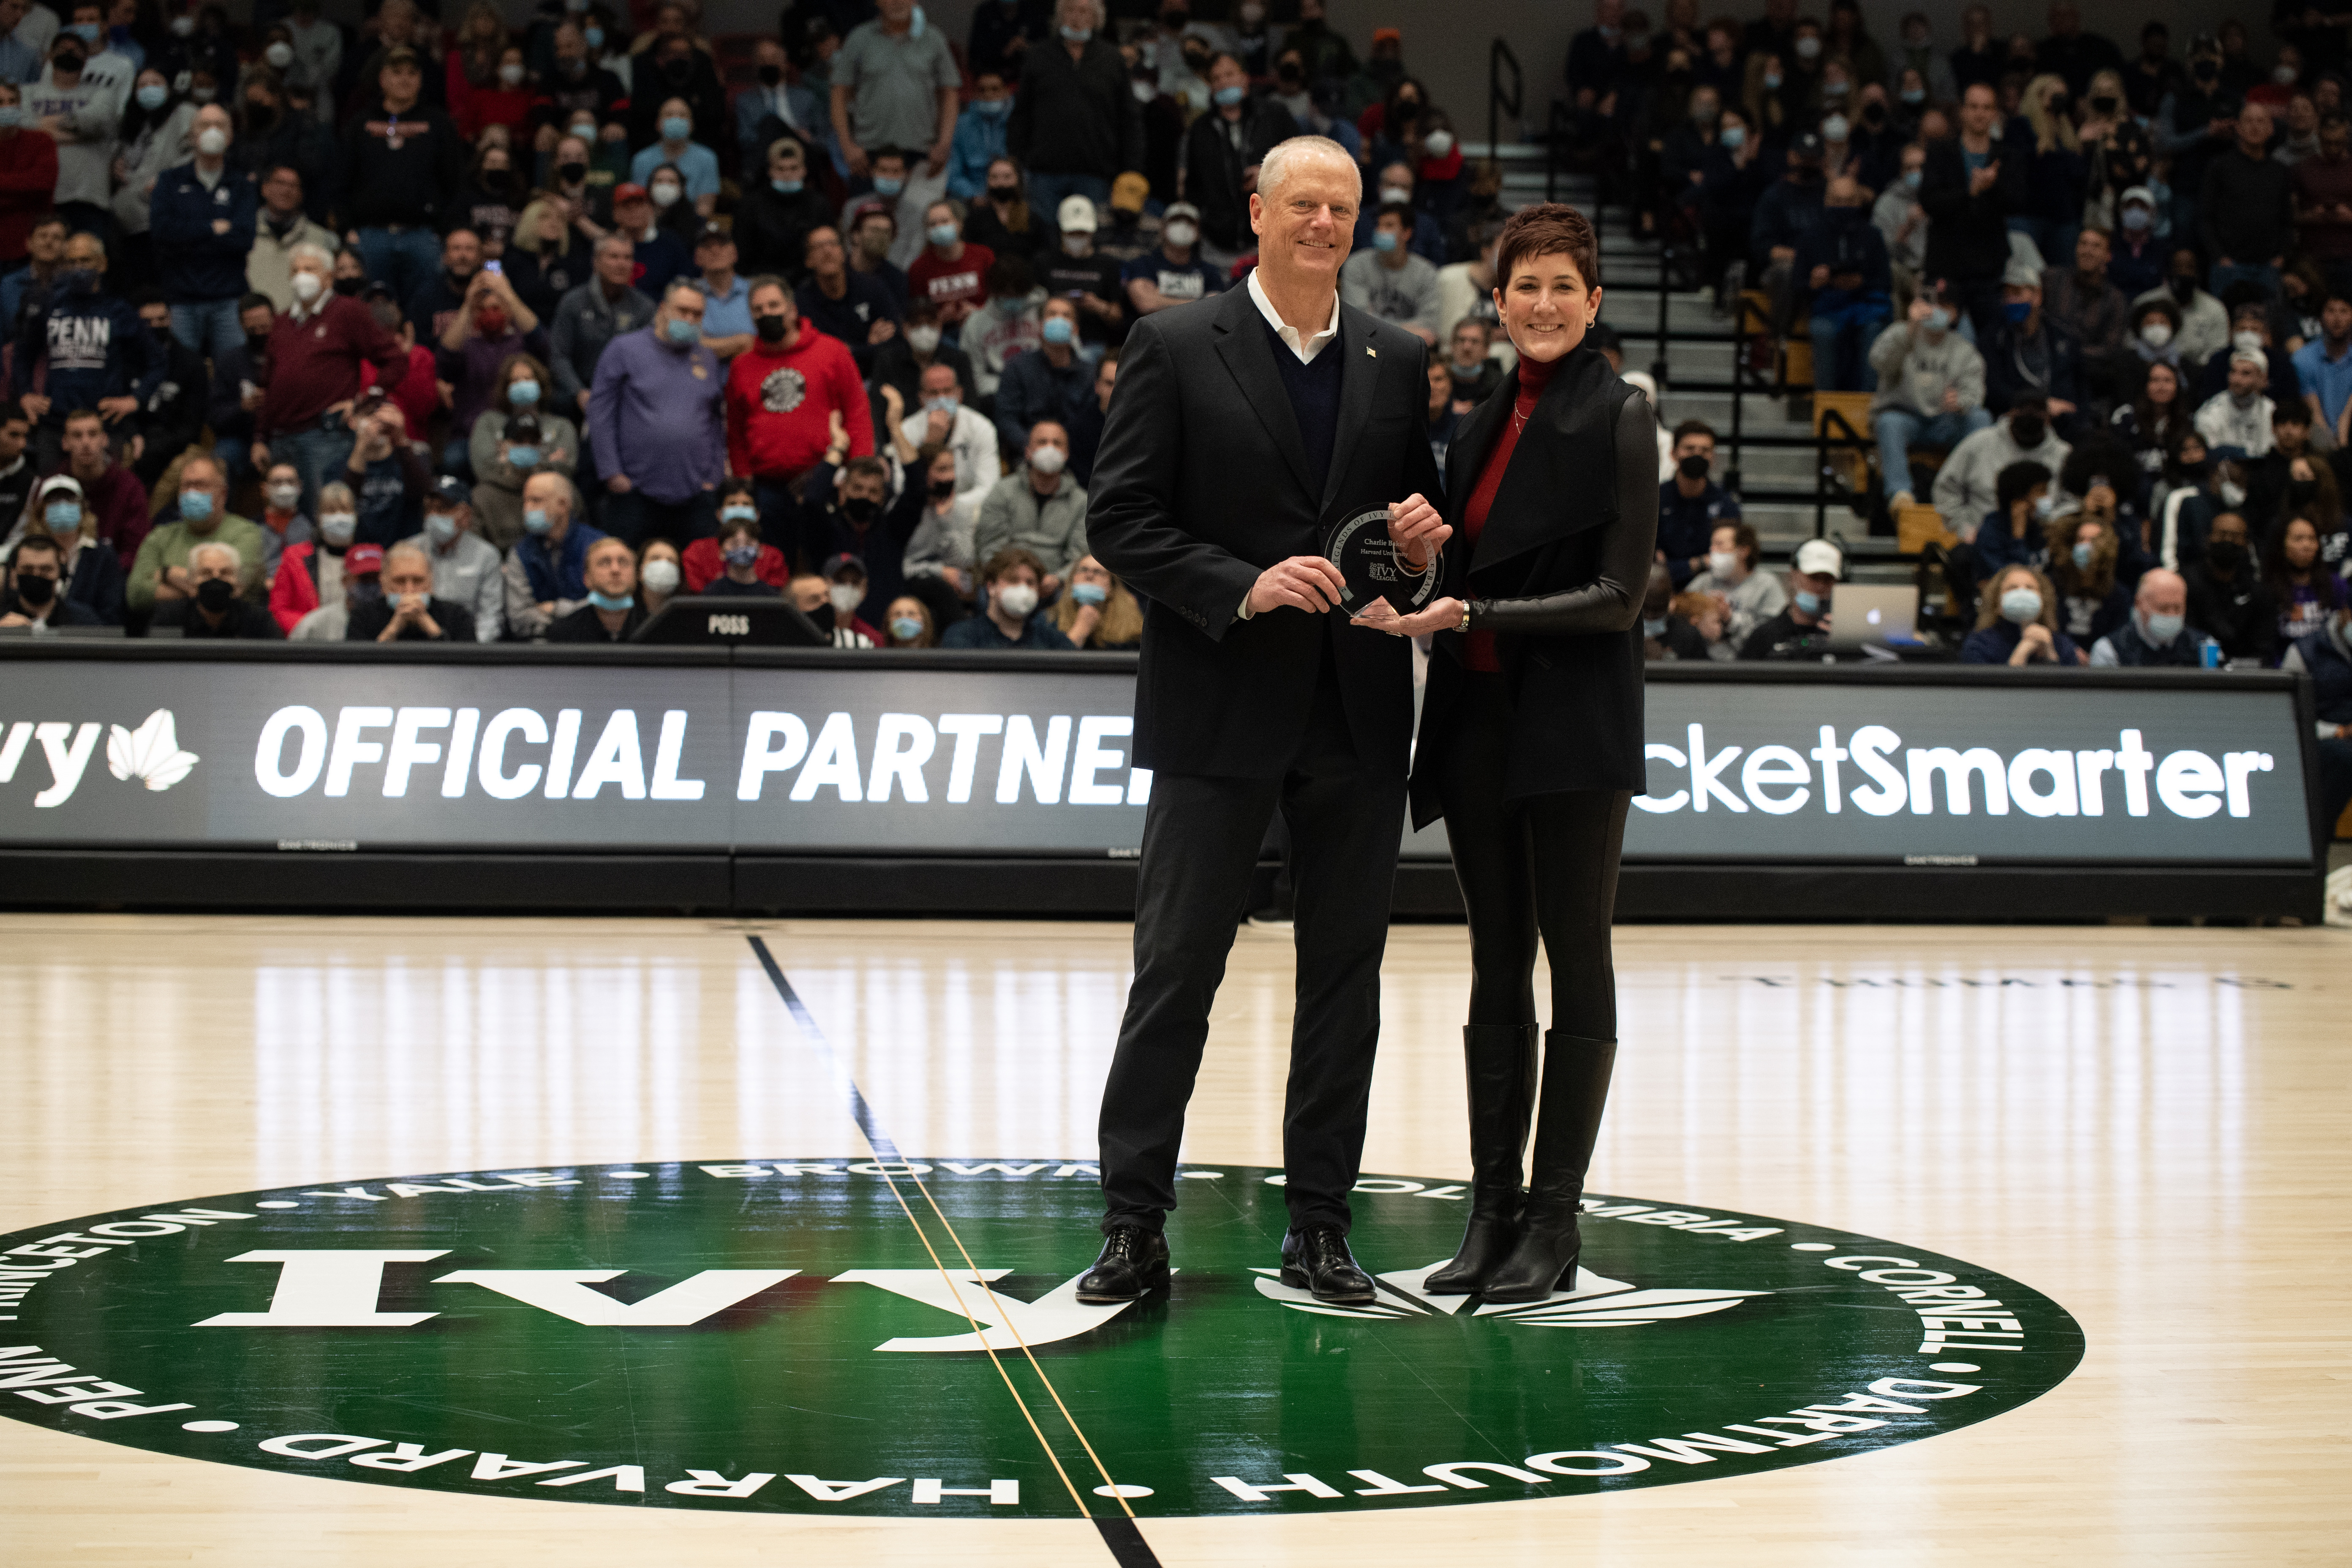 This March 12, 2022, file photo shows Massachusetts Gov. Charlie Baker being presented with an award by Harvard University Director of Athletics Erin McDermott to honor him for the Class of 2022 Legends of Ivy League Basketball during the Ivy League Tournament semifinal between the Pennsylvania Quakers and Yale Bulldogs at Lavietes Pavilion in Boston's Allston neighborhood.